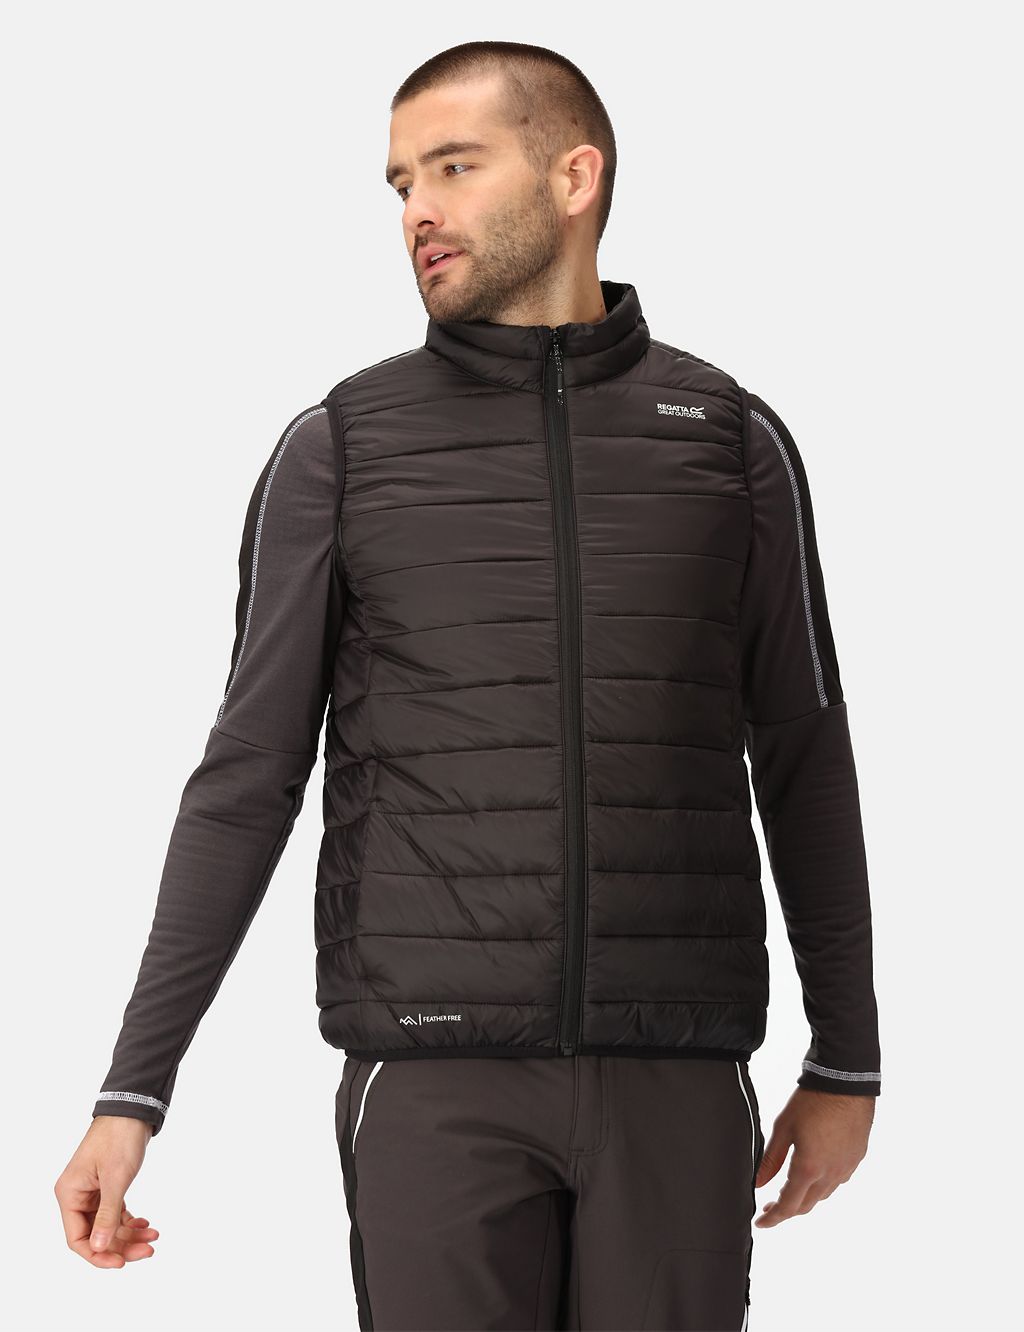 Marizion Water-Repellent Gilet 3 of 5